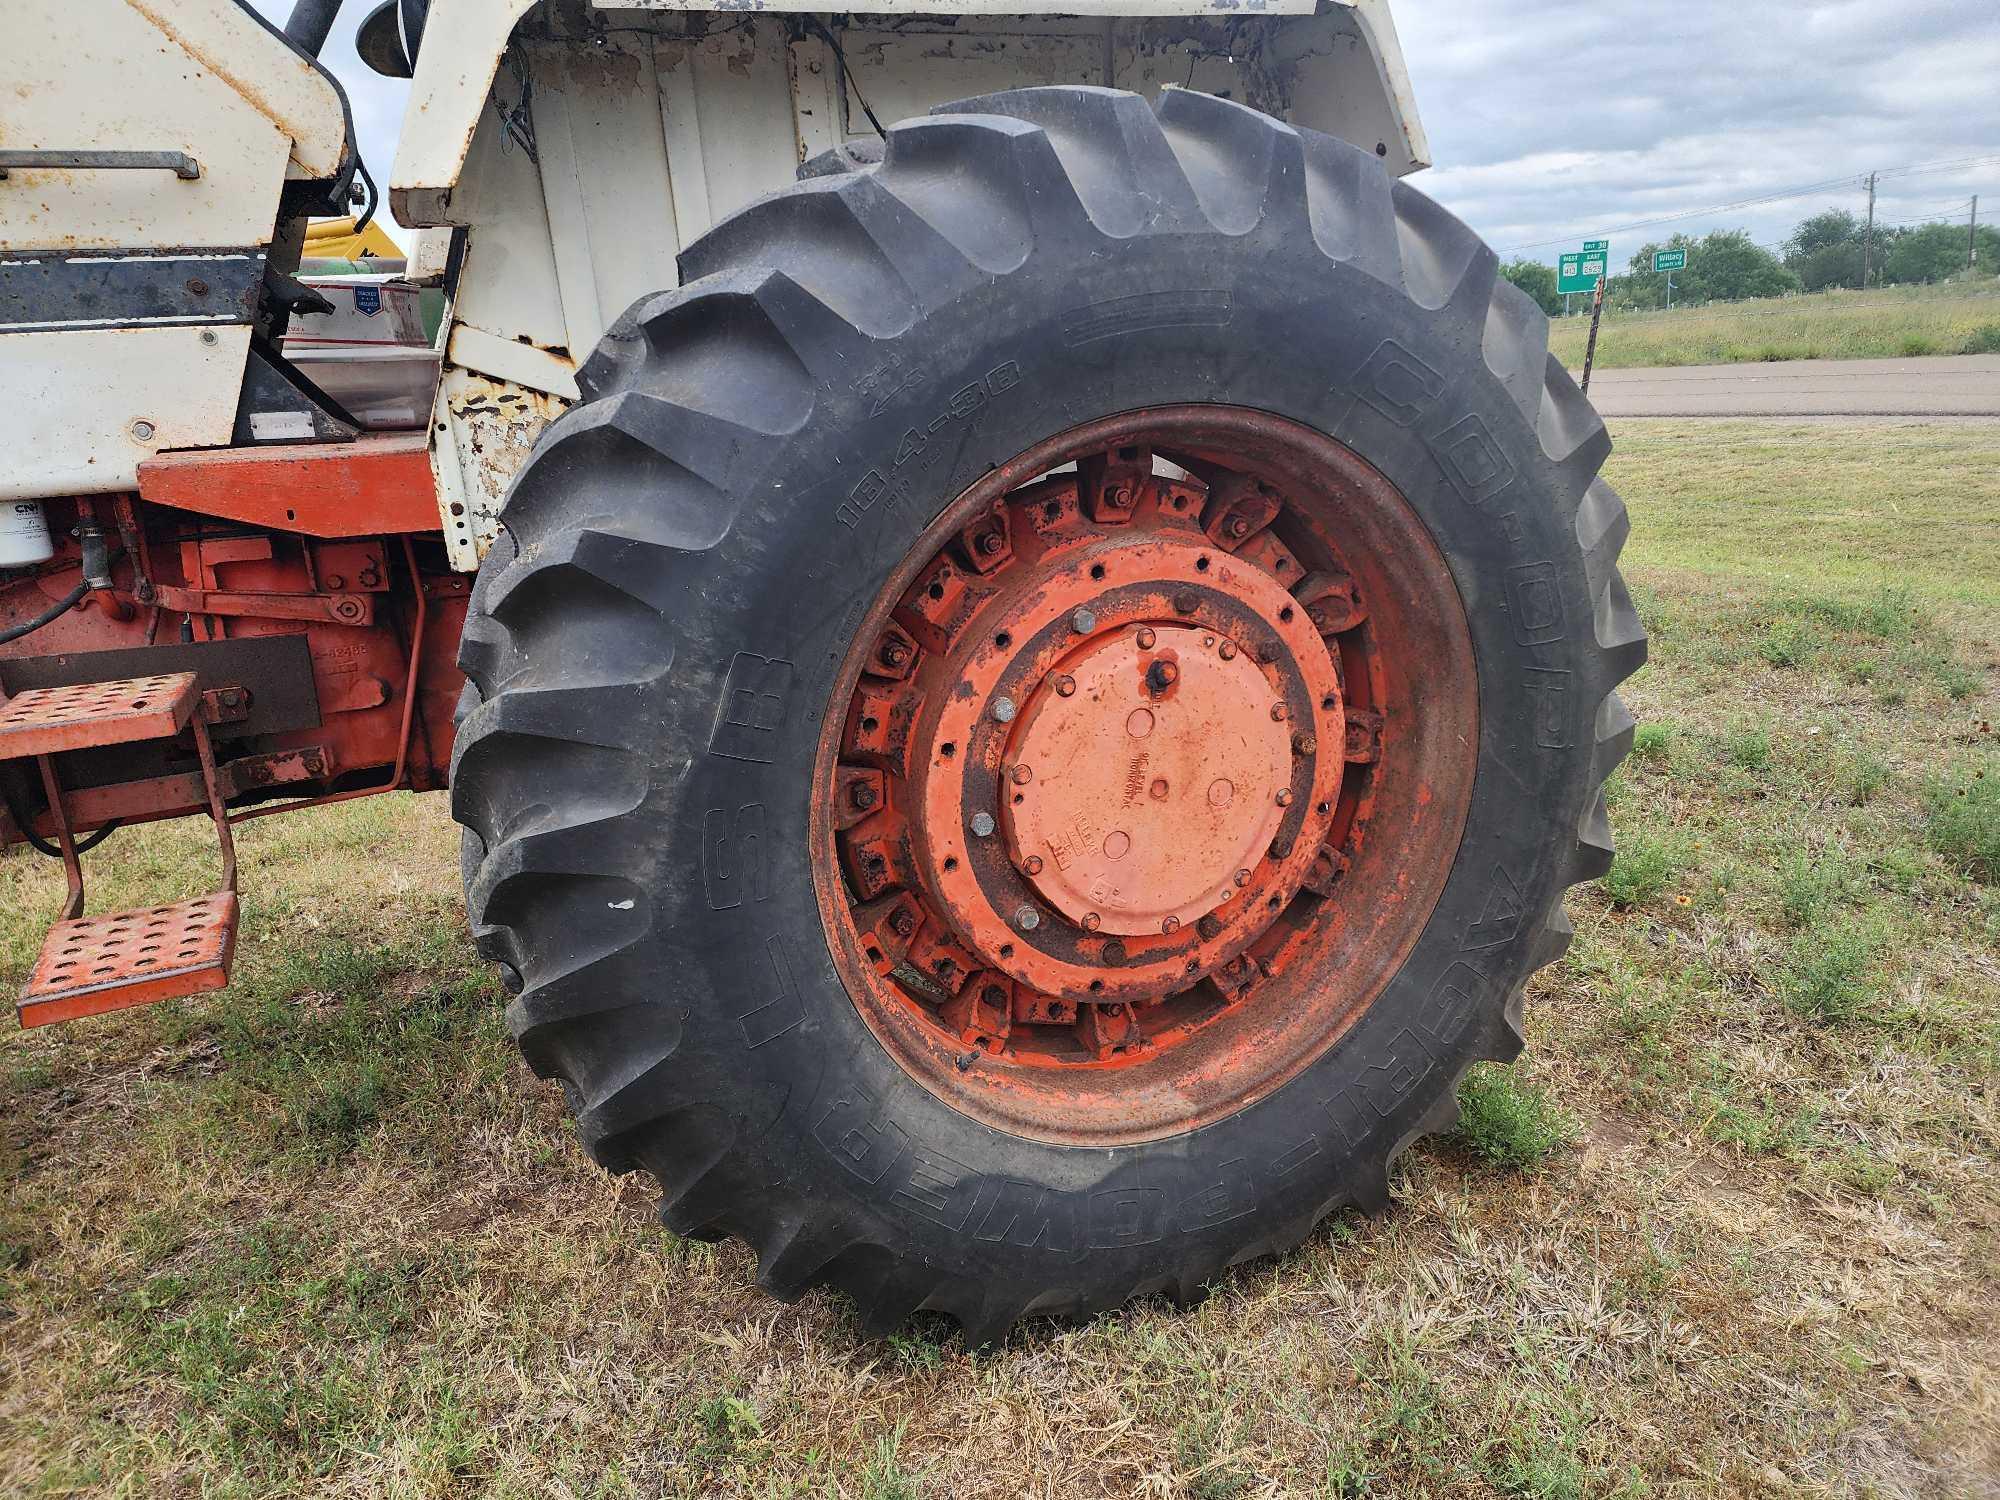 1974 Case Agri King 1175 Tractor w/(2) Tractor Tires 18.4-38 on 16" Rims, 15-38